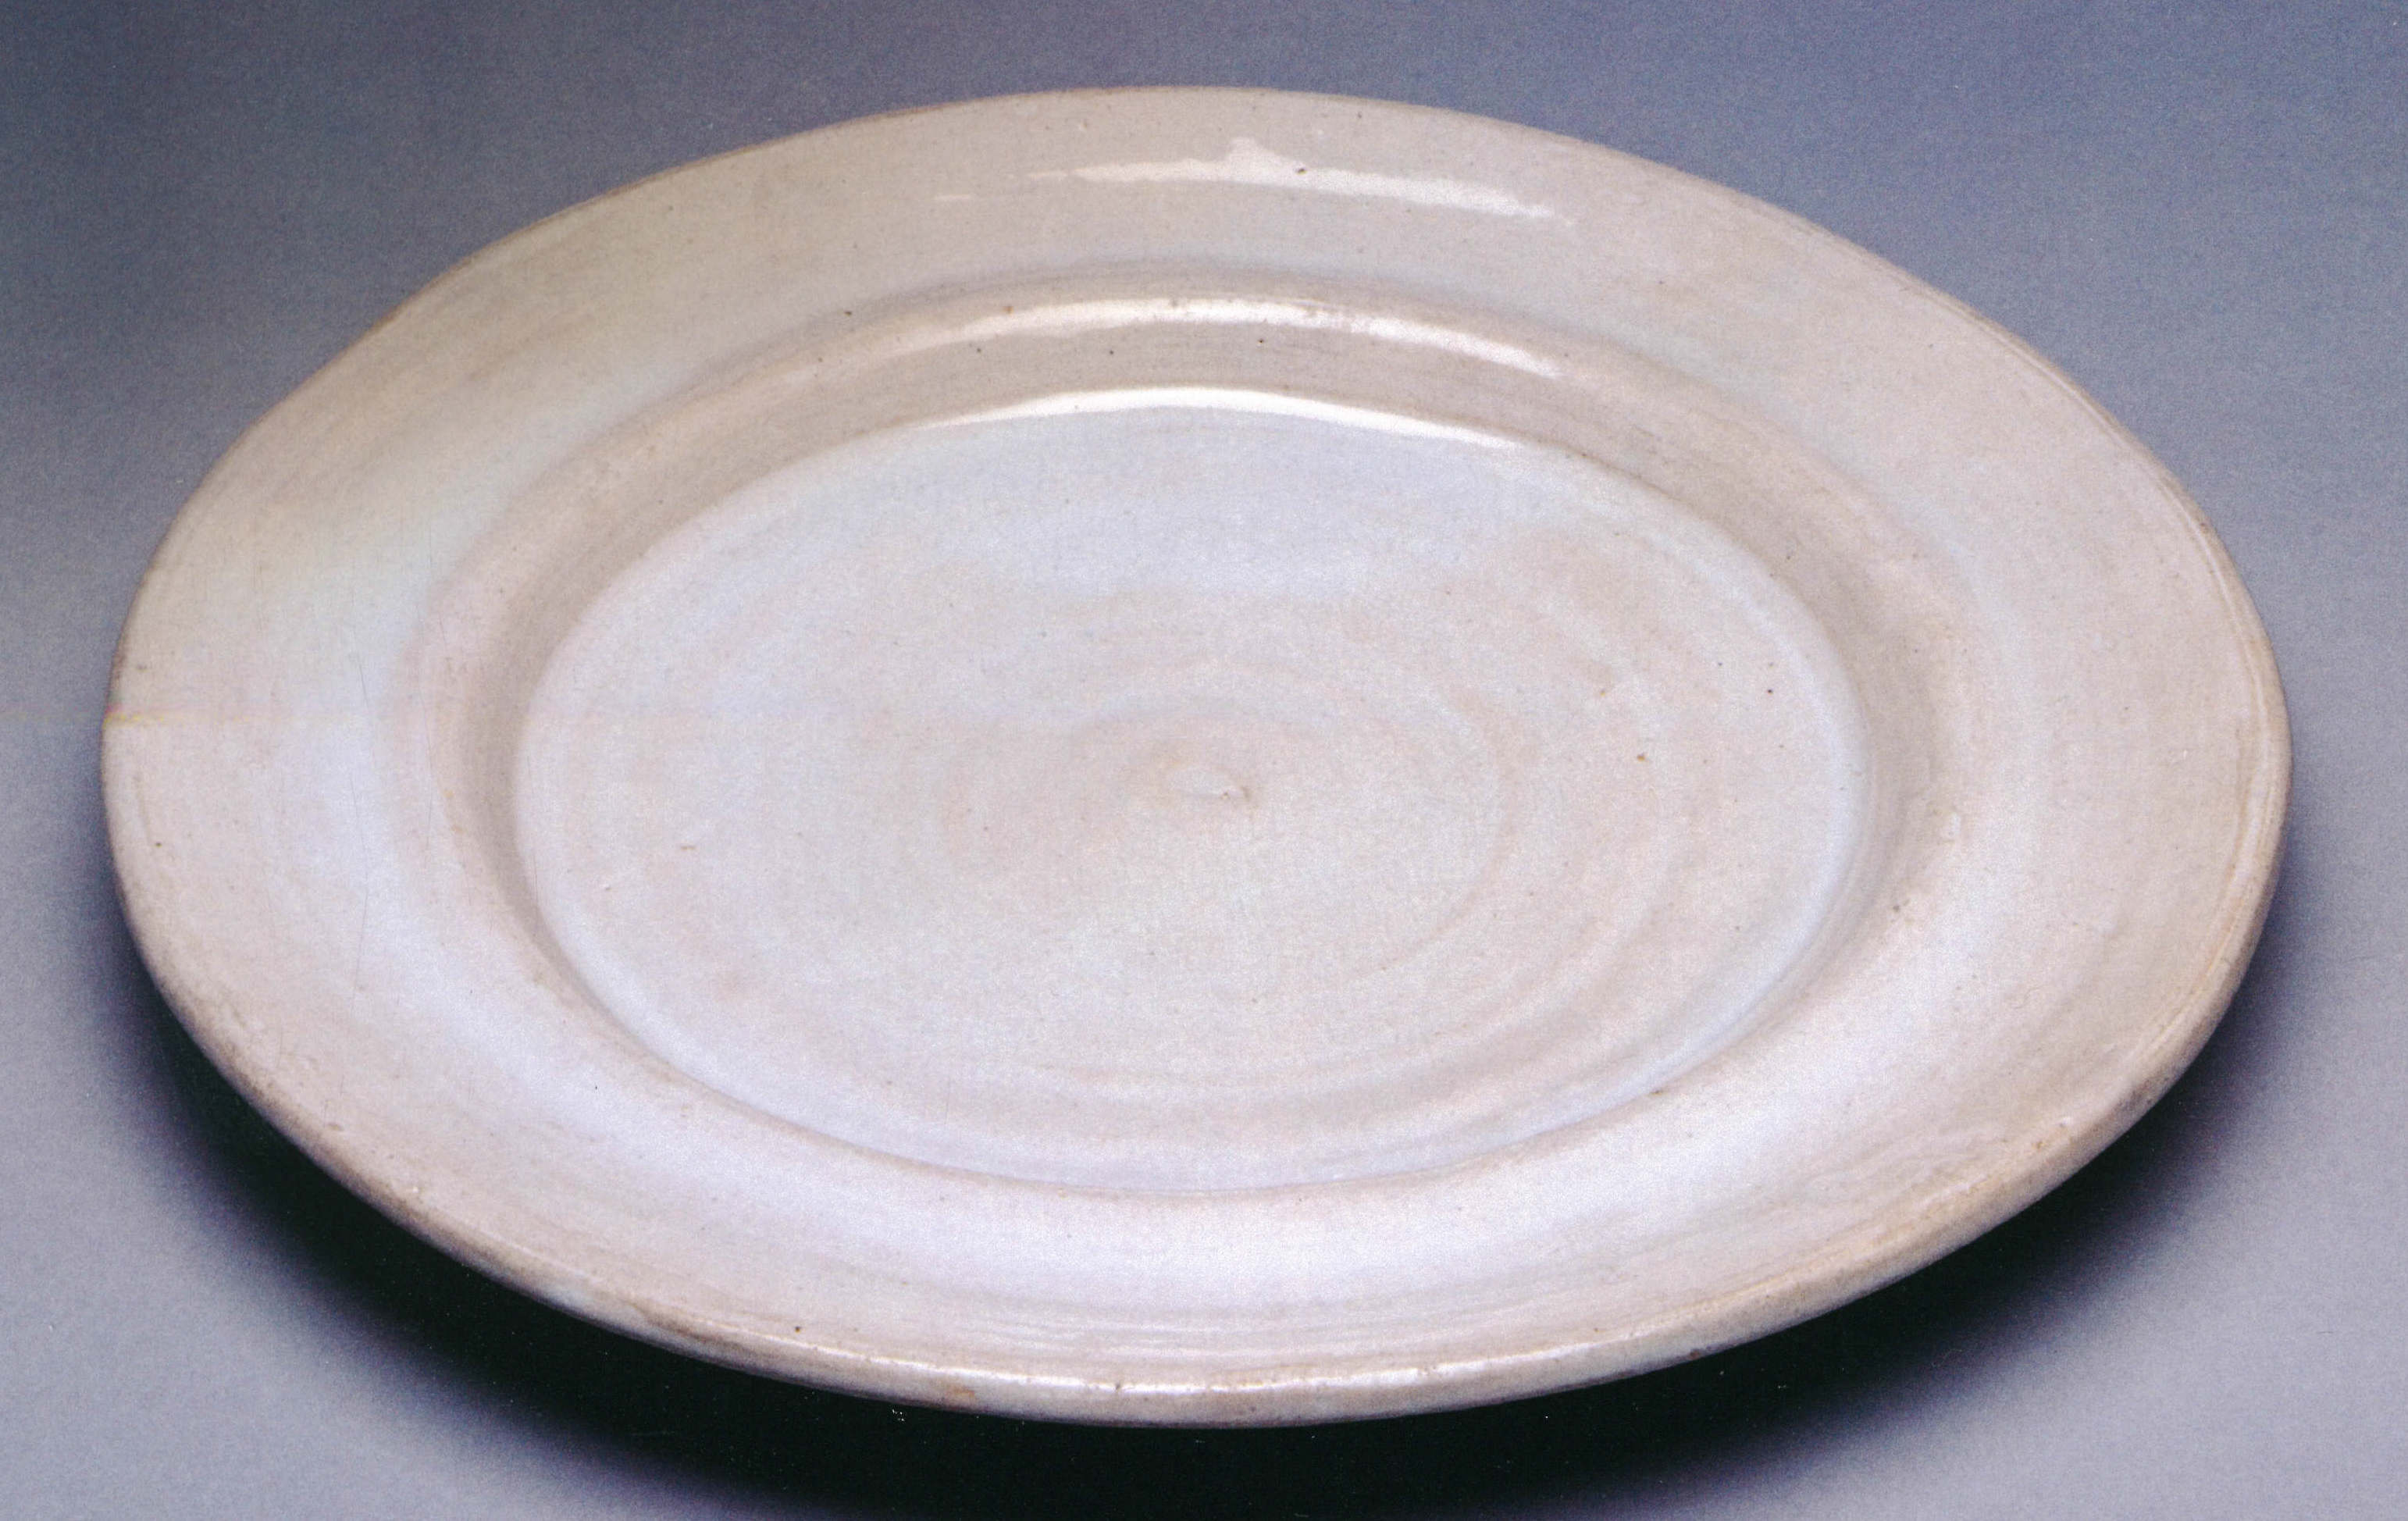 about 1914–16, earthenware with white tin glaze, 30.48 cm diameter, private collection. 